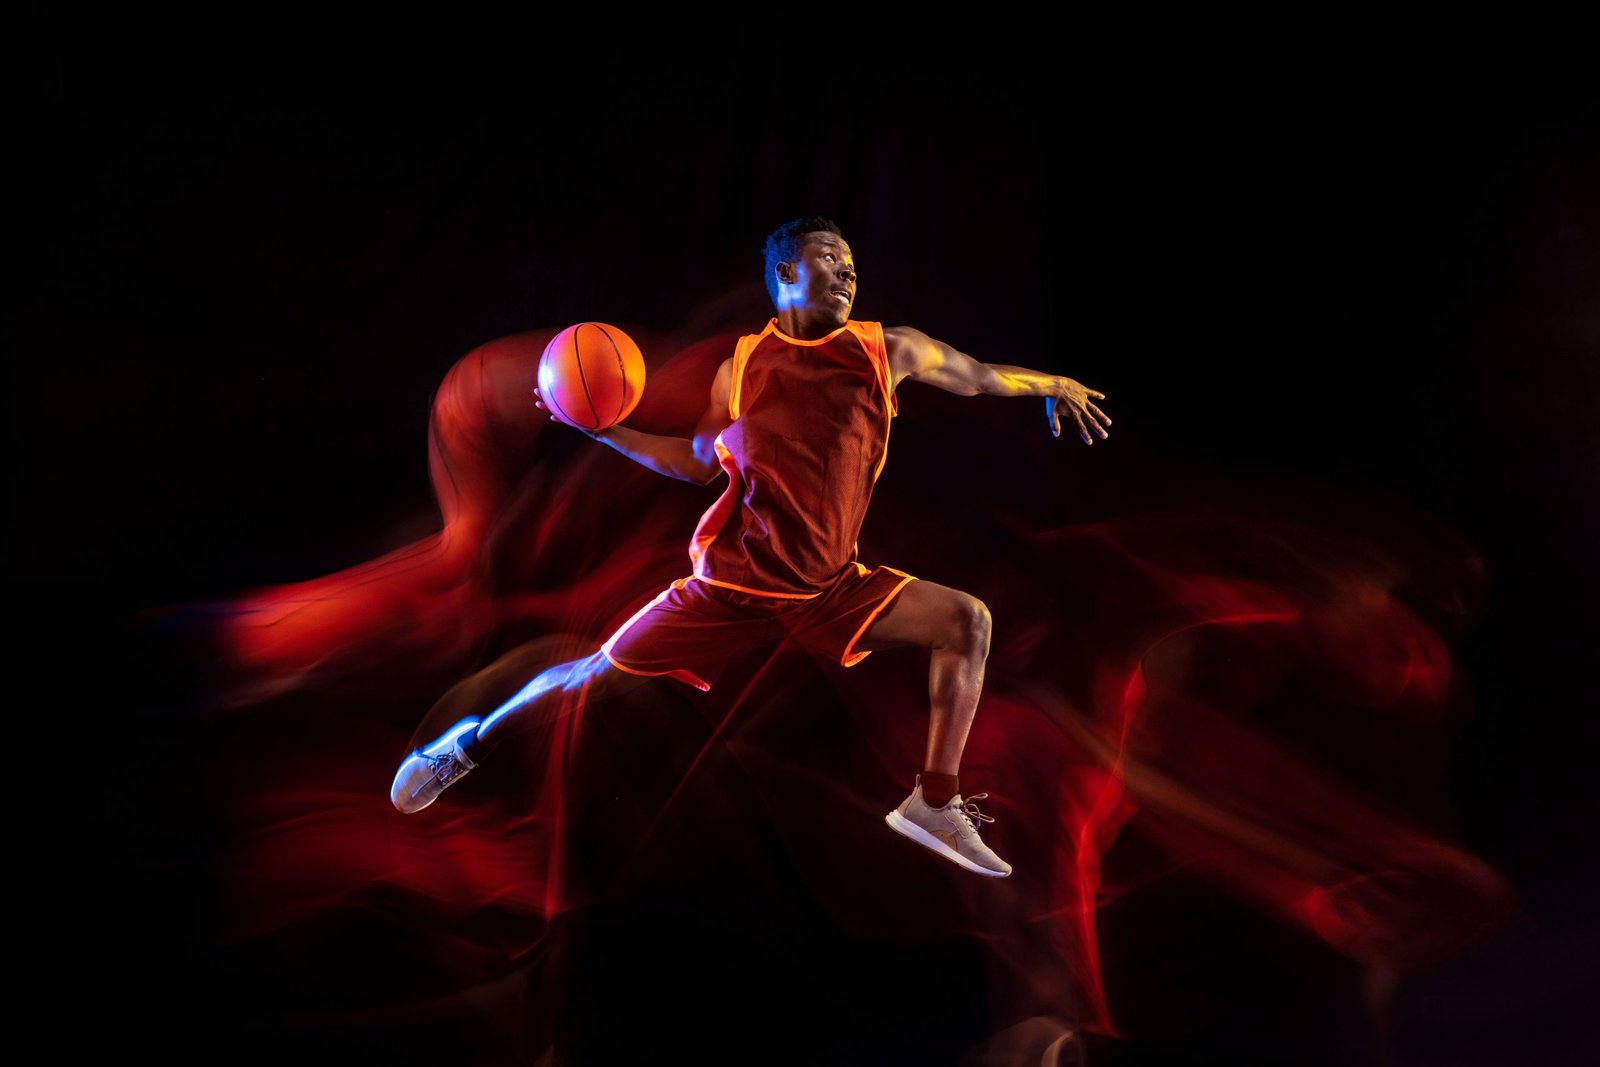 see-target-african-american-young-basketball-player-red-team-action-neon-lights-dark-studio-background-concept-sport-movement-energy-dynamic-healthy-lifestyle